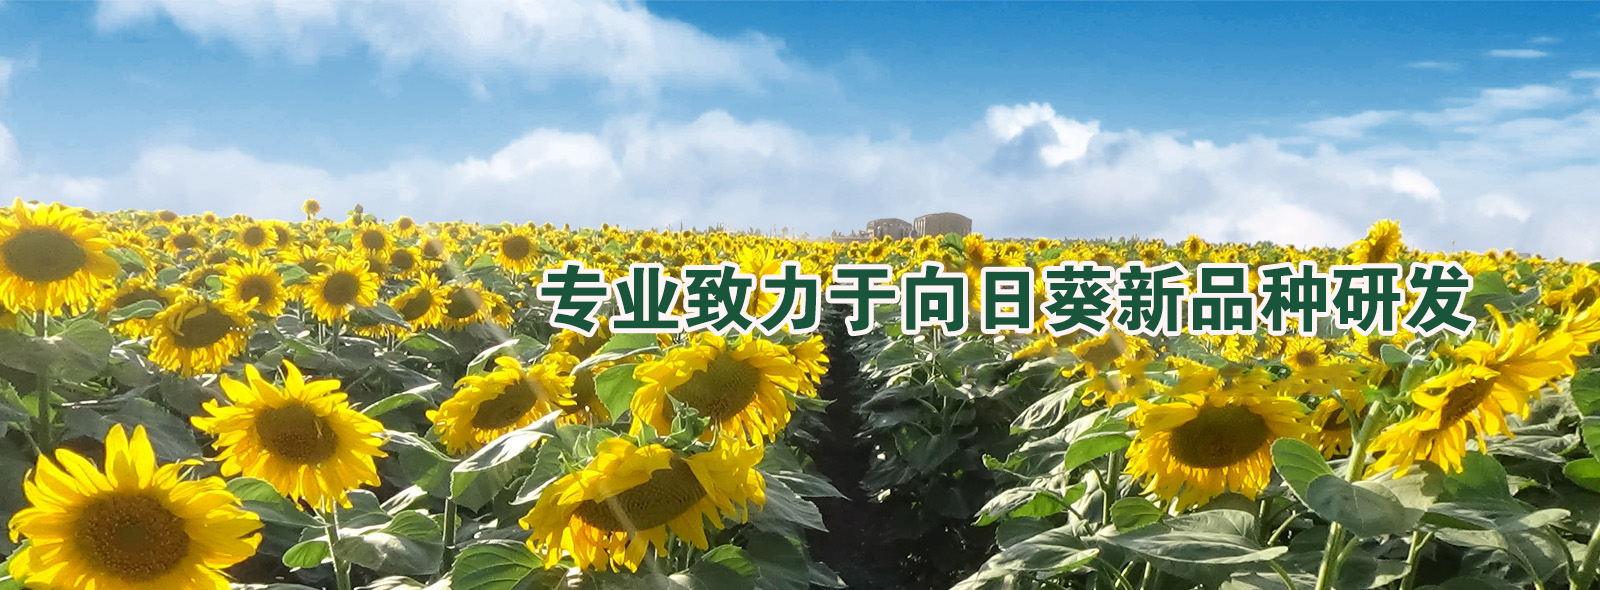 hth华体会体育米兰banner